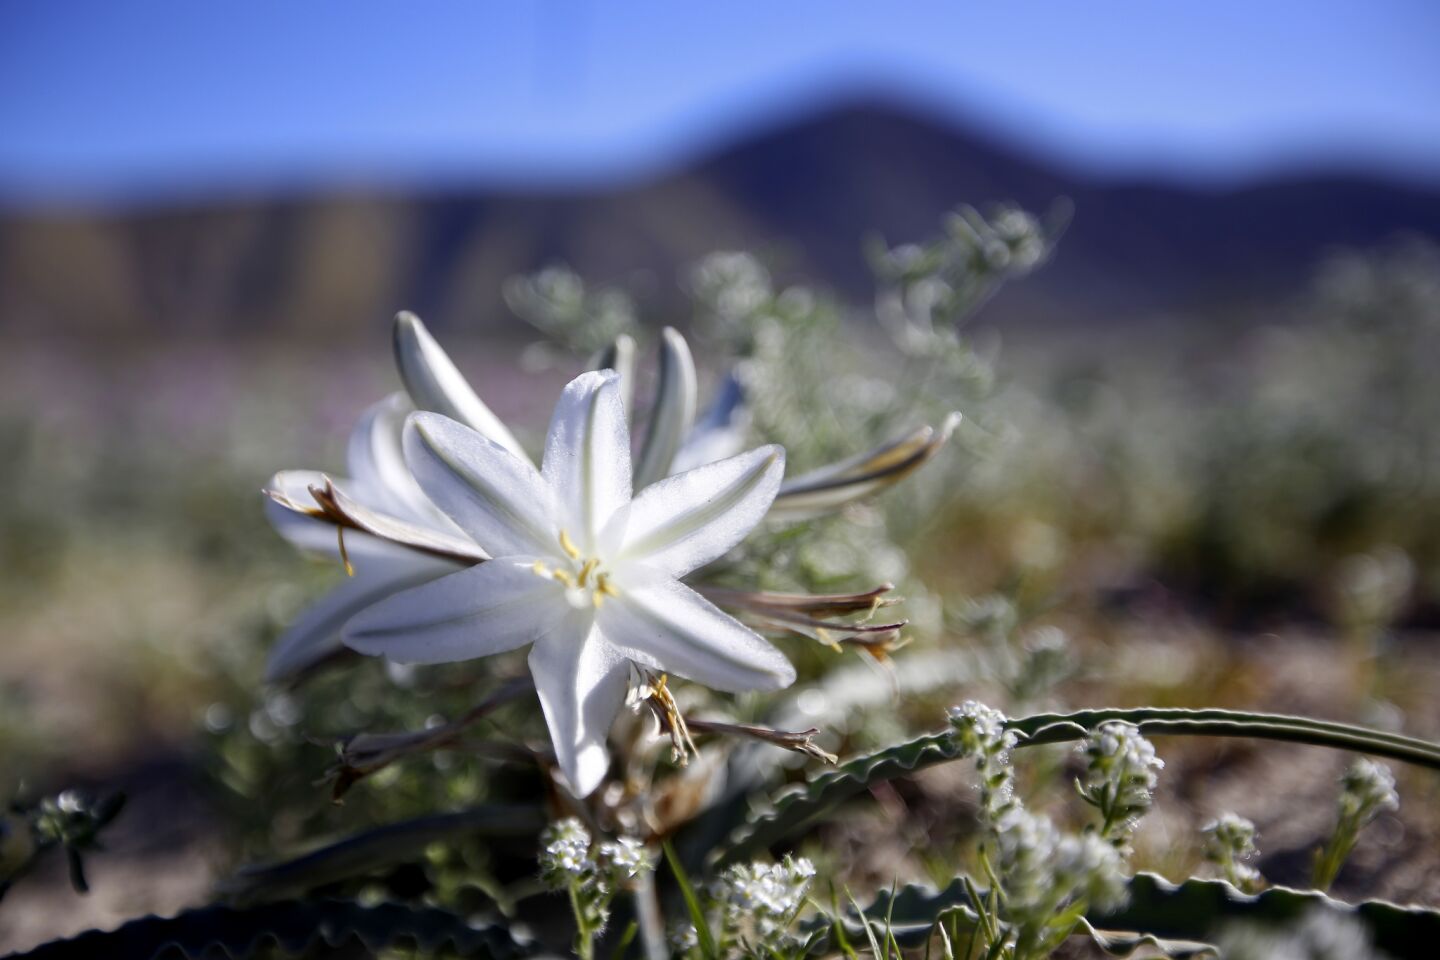 Desert Lily blooms in the Anza-Borrego Desert State Park in San Diego County.